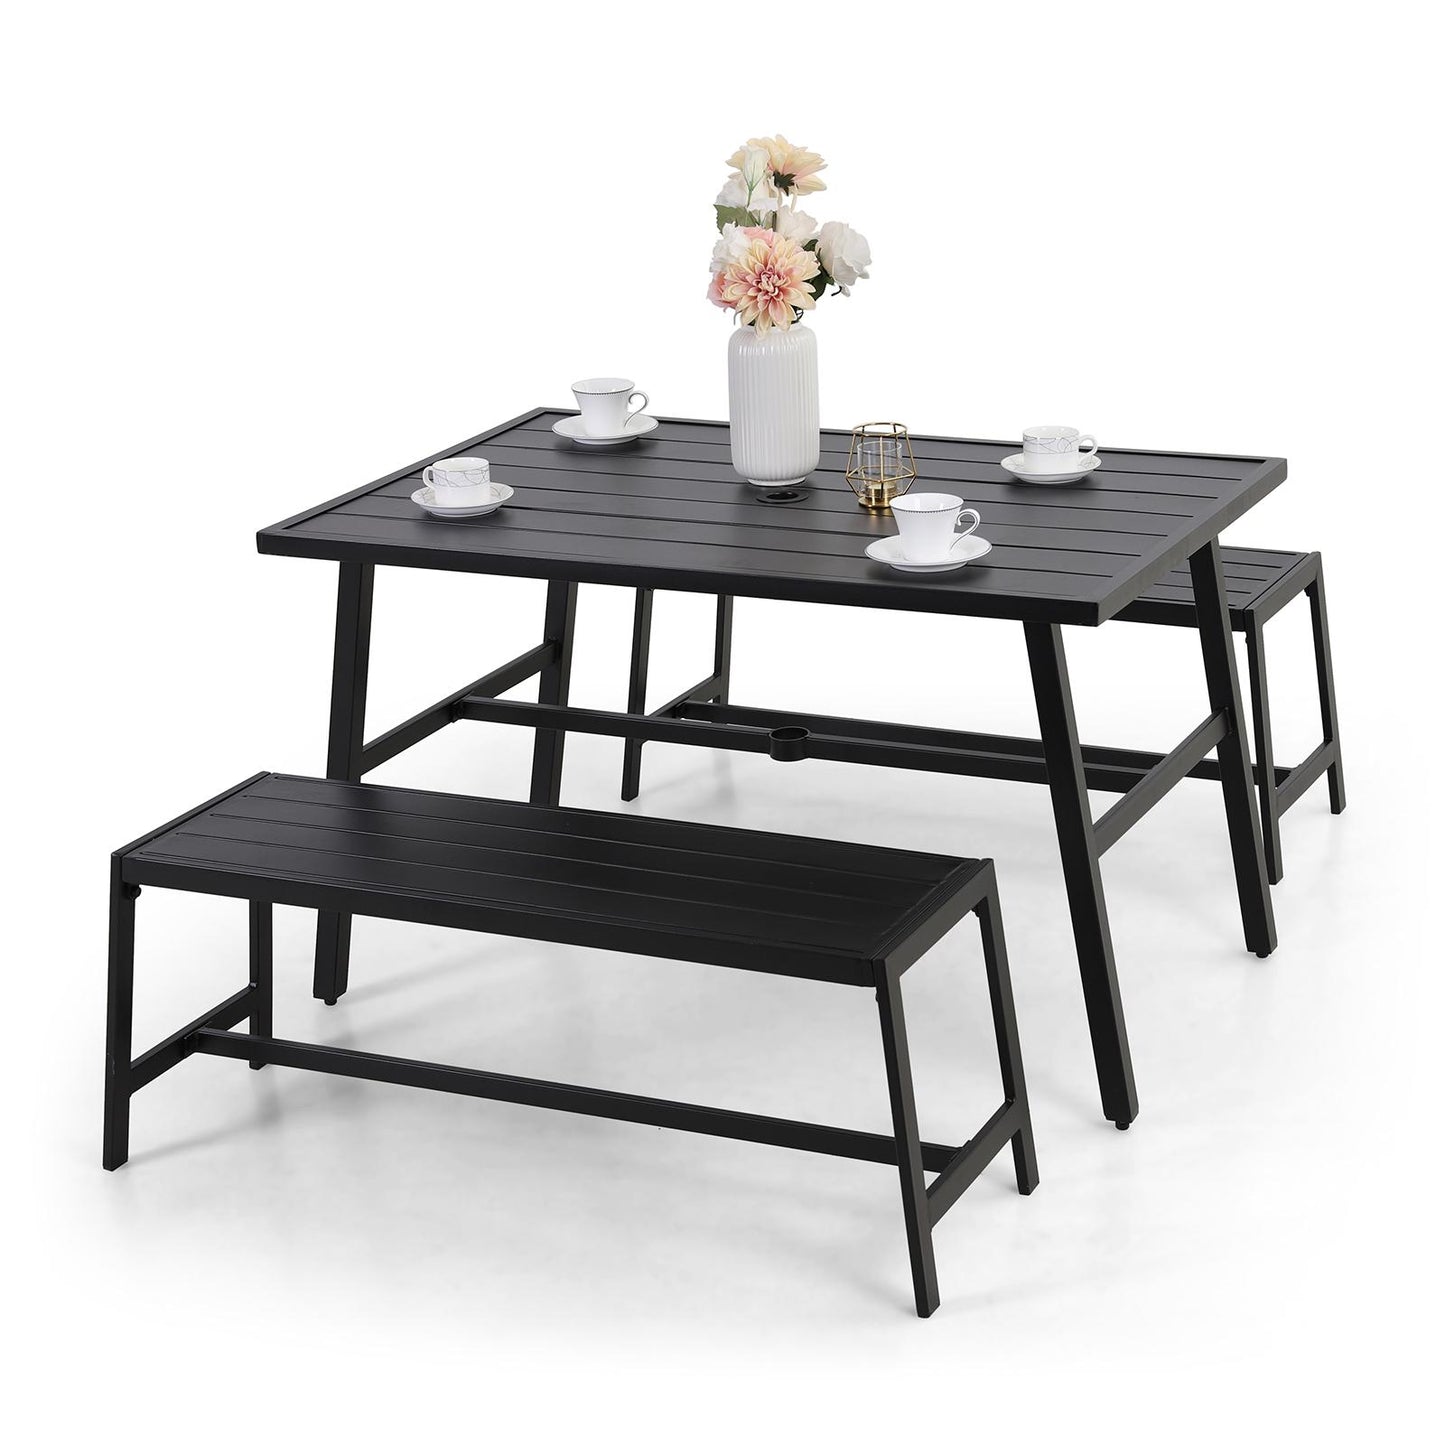 Sophia & William 3 Pieces Metal Outdoor Table Bench Set for 4 People